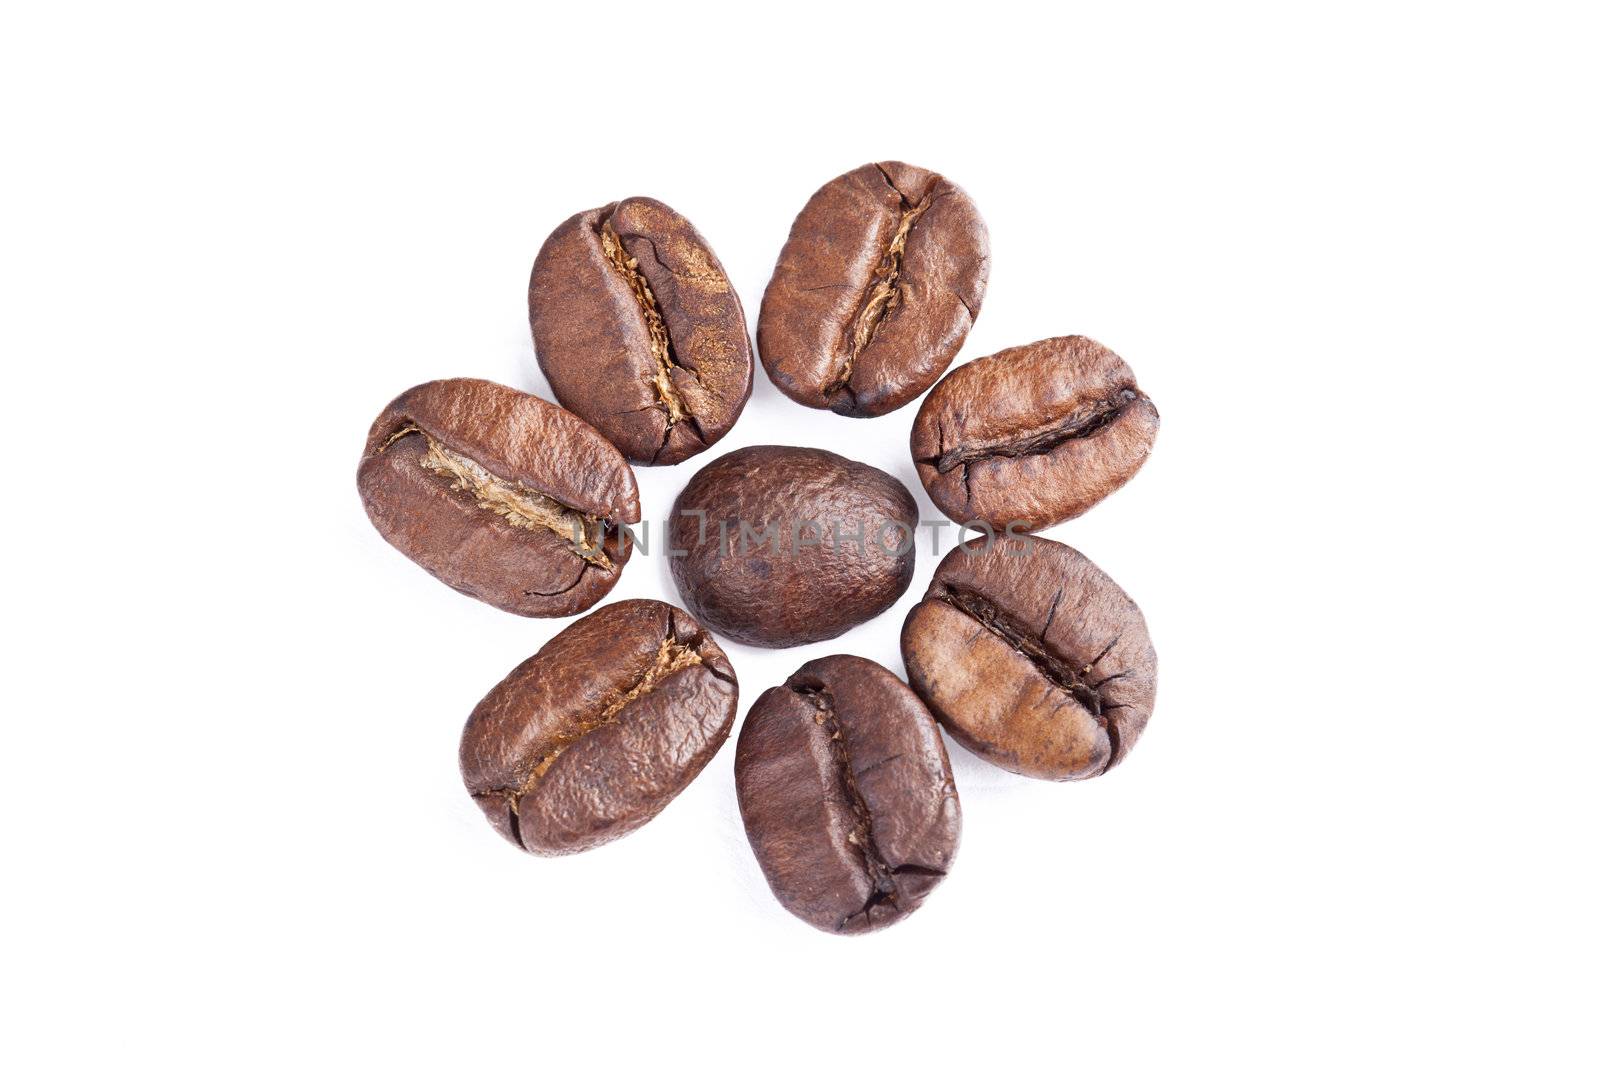 Illustration of few coffee beans on a white background